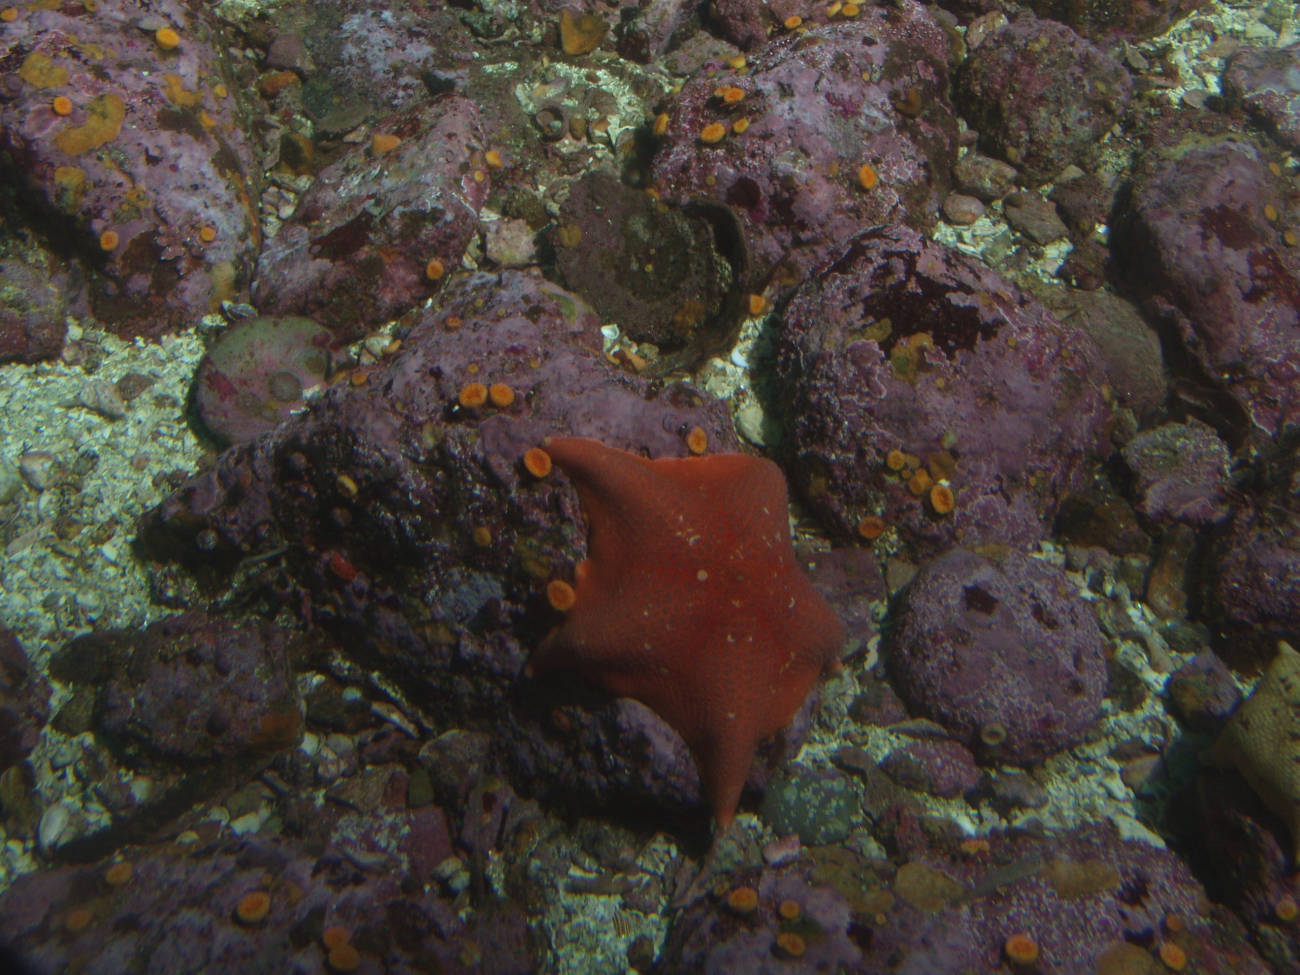 Bat sea star (Asterina minuita)up close on rocky reef covered withinvertebrates at 25 meters depth